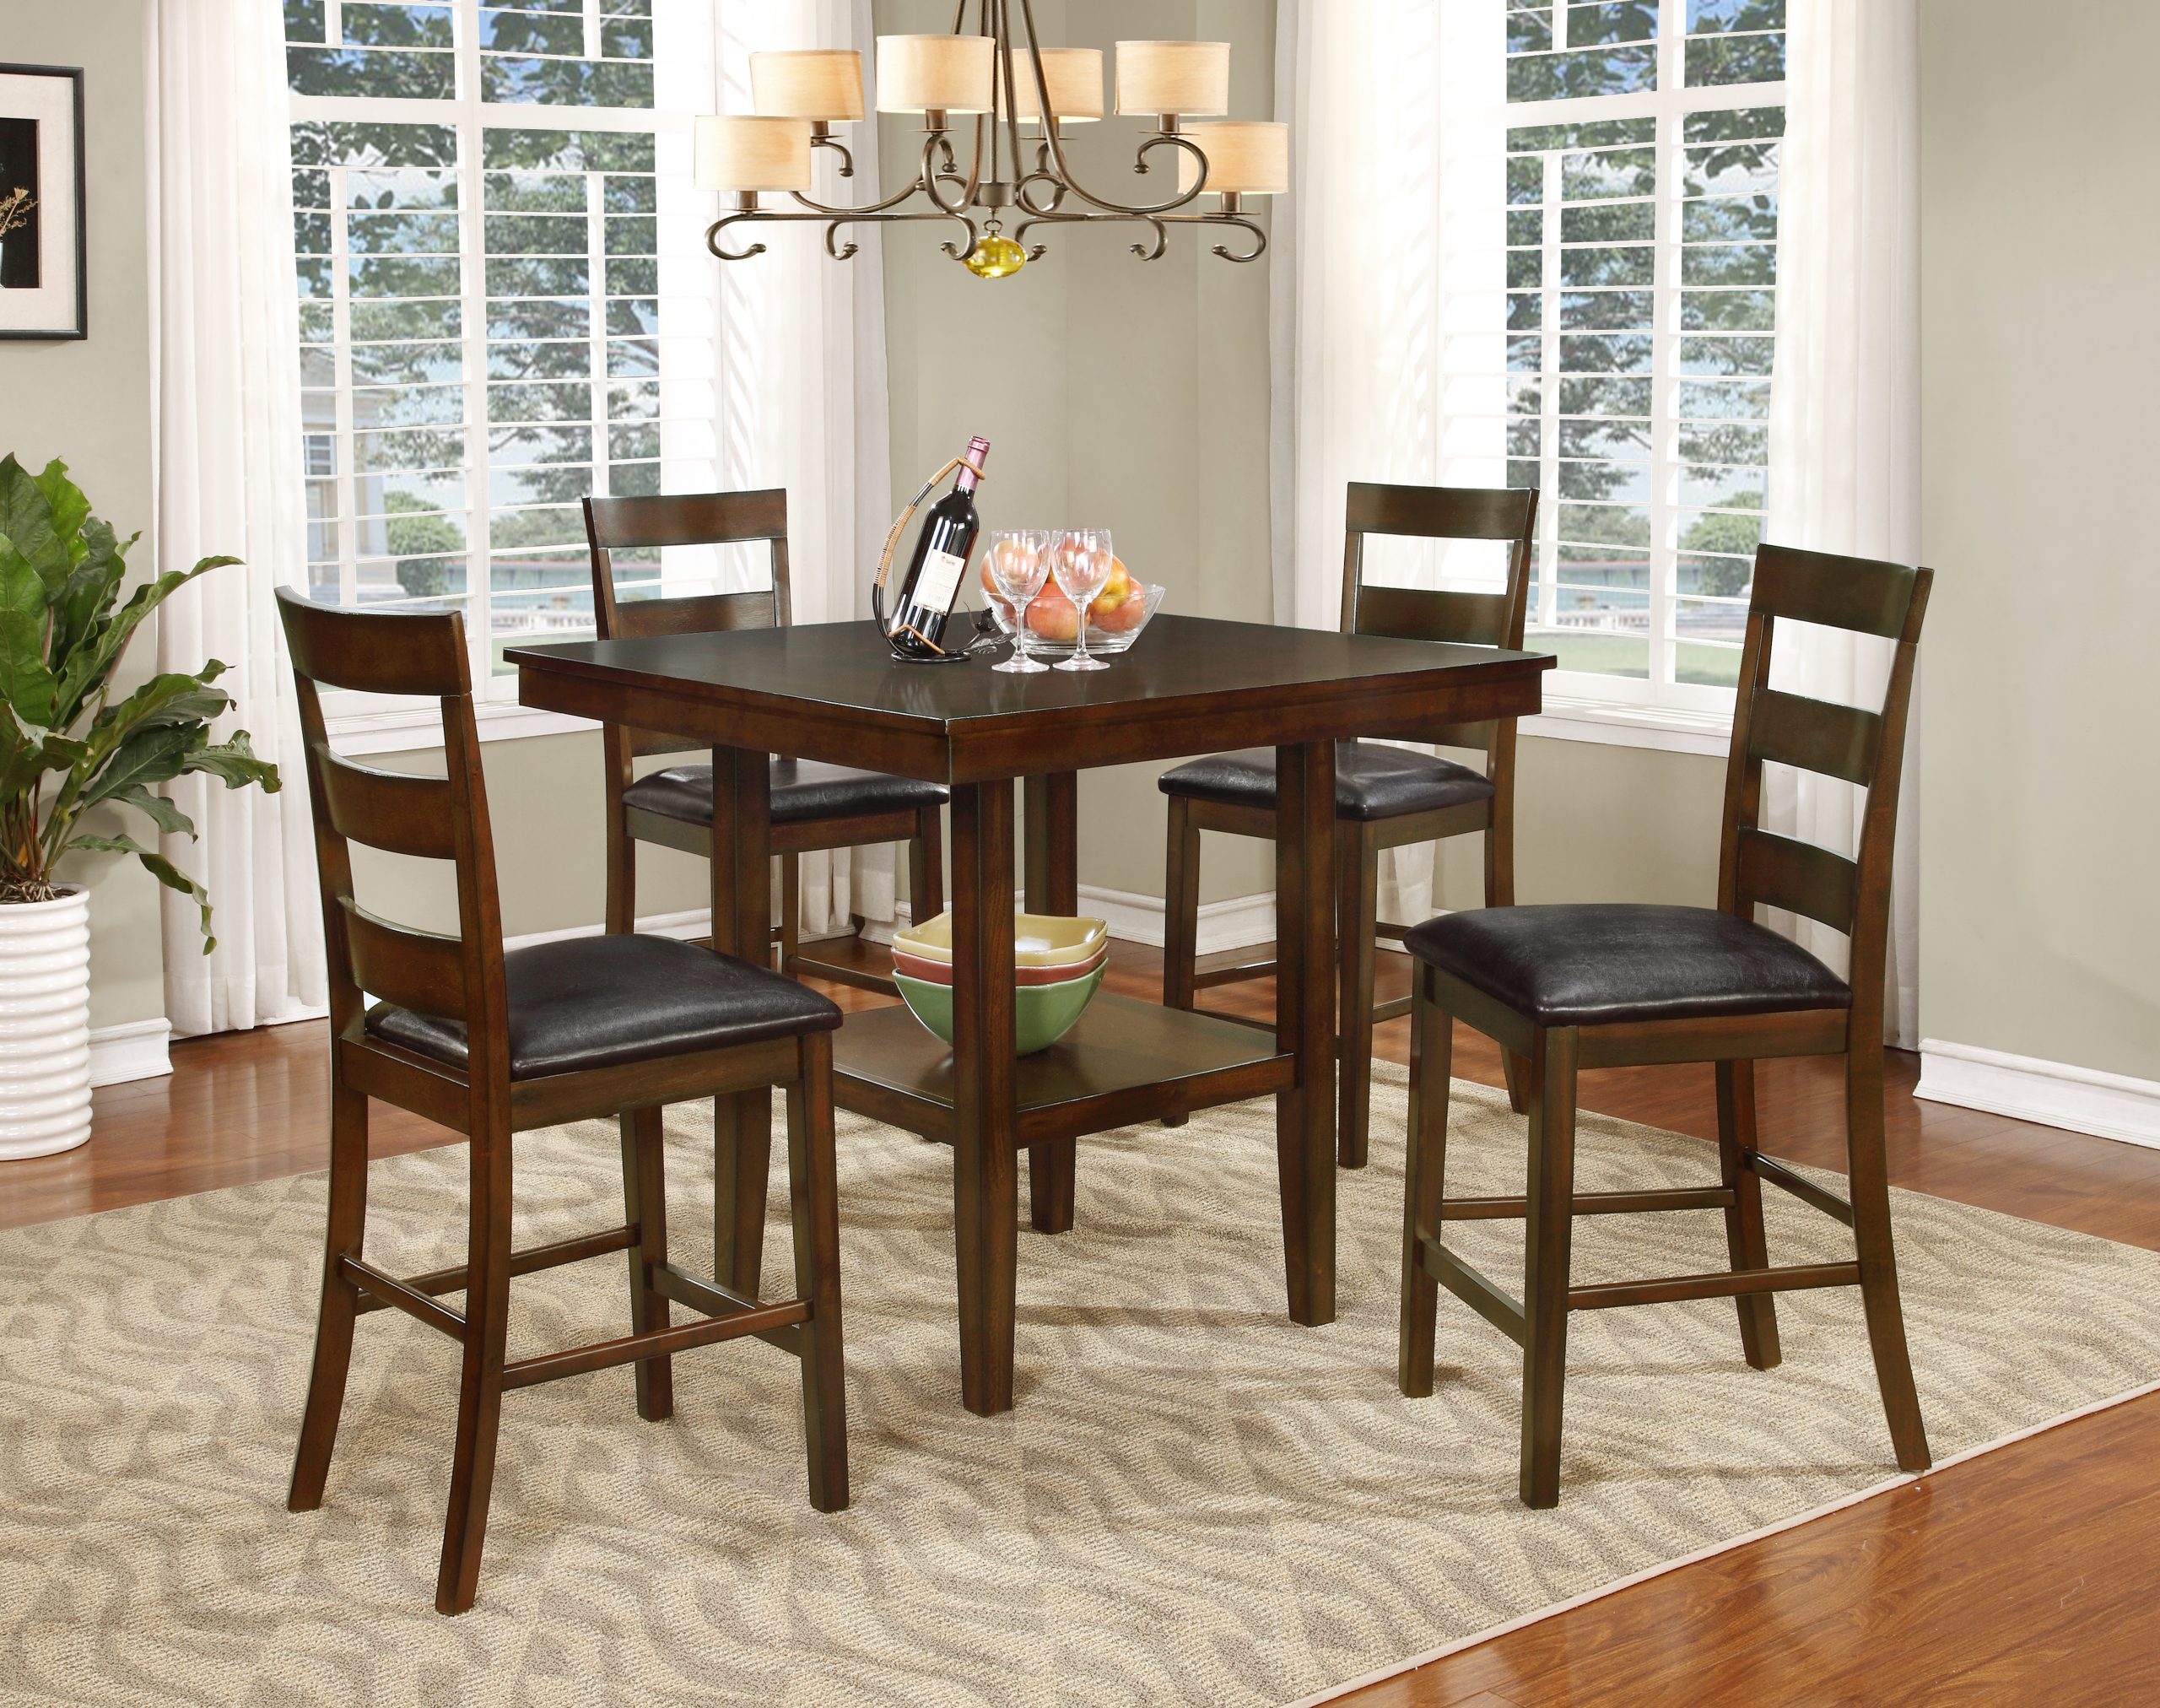 WALNUT BROWN COUNTER HEIGHT TABLE W/4CHAIRS